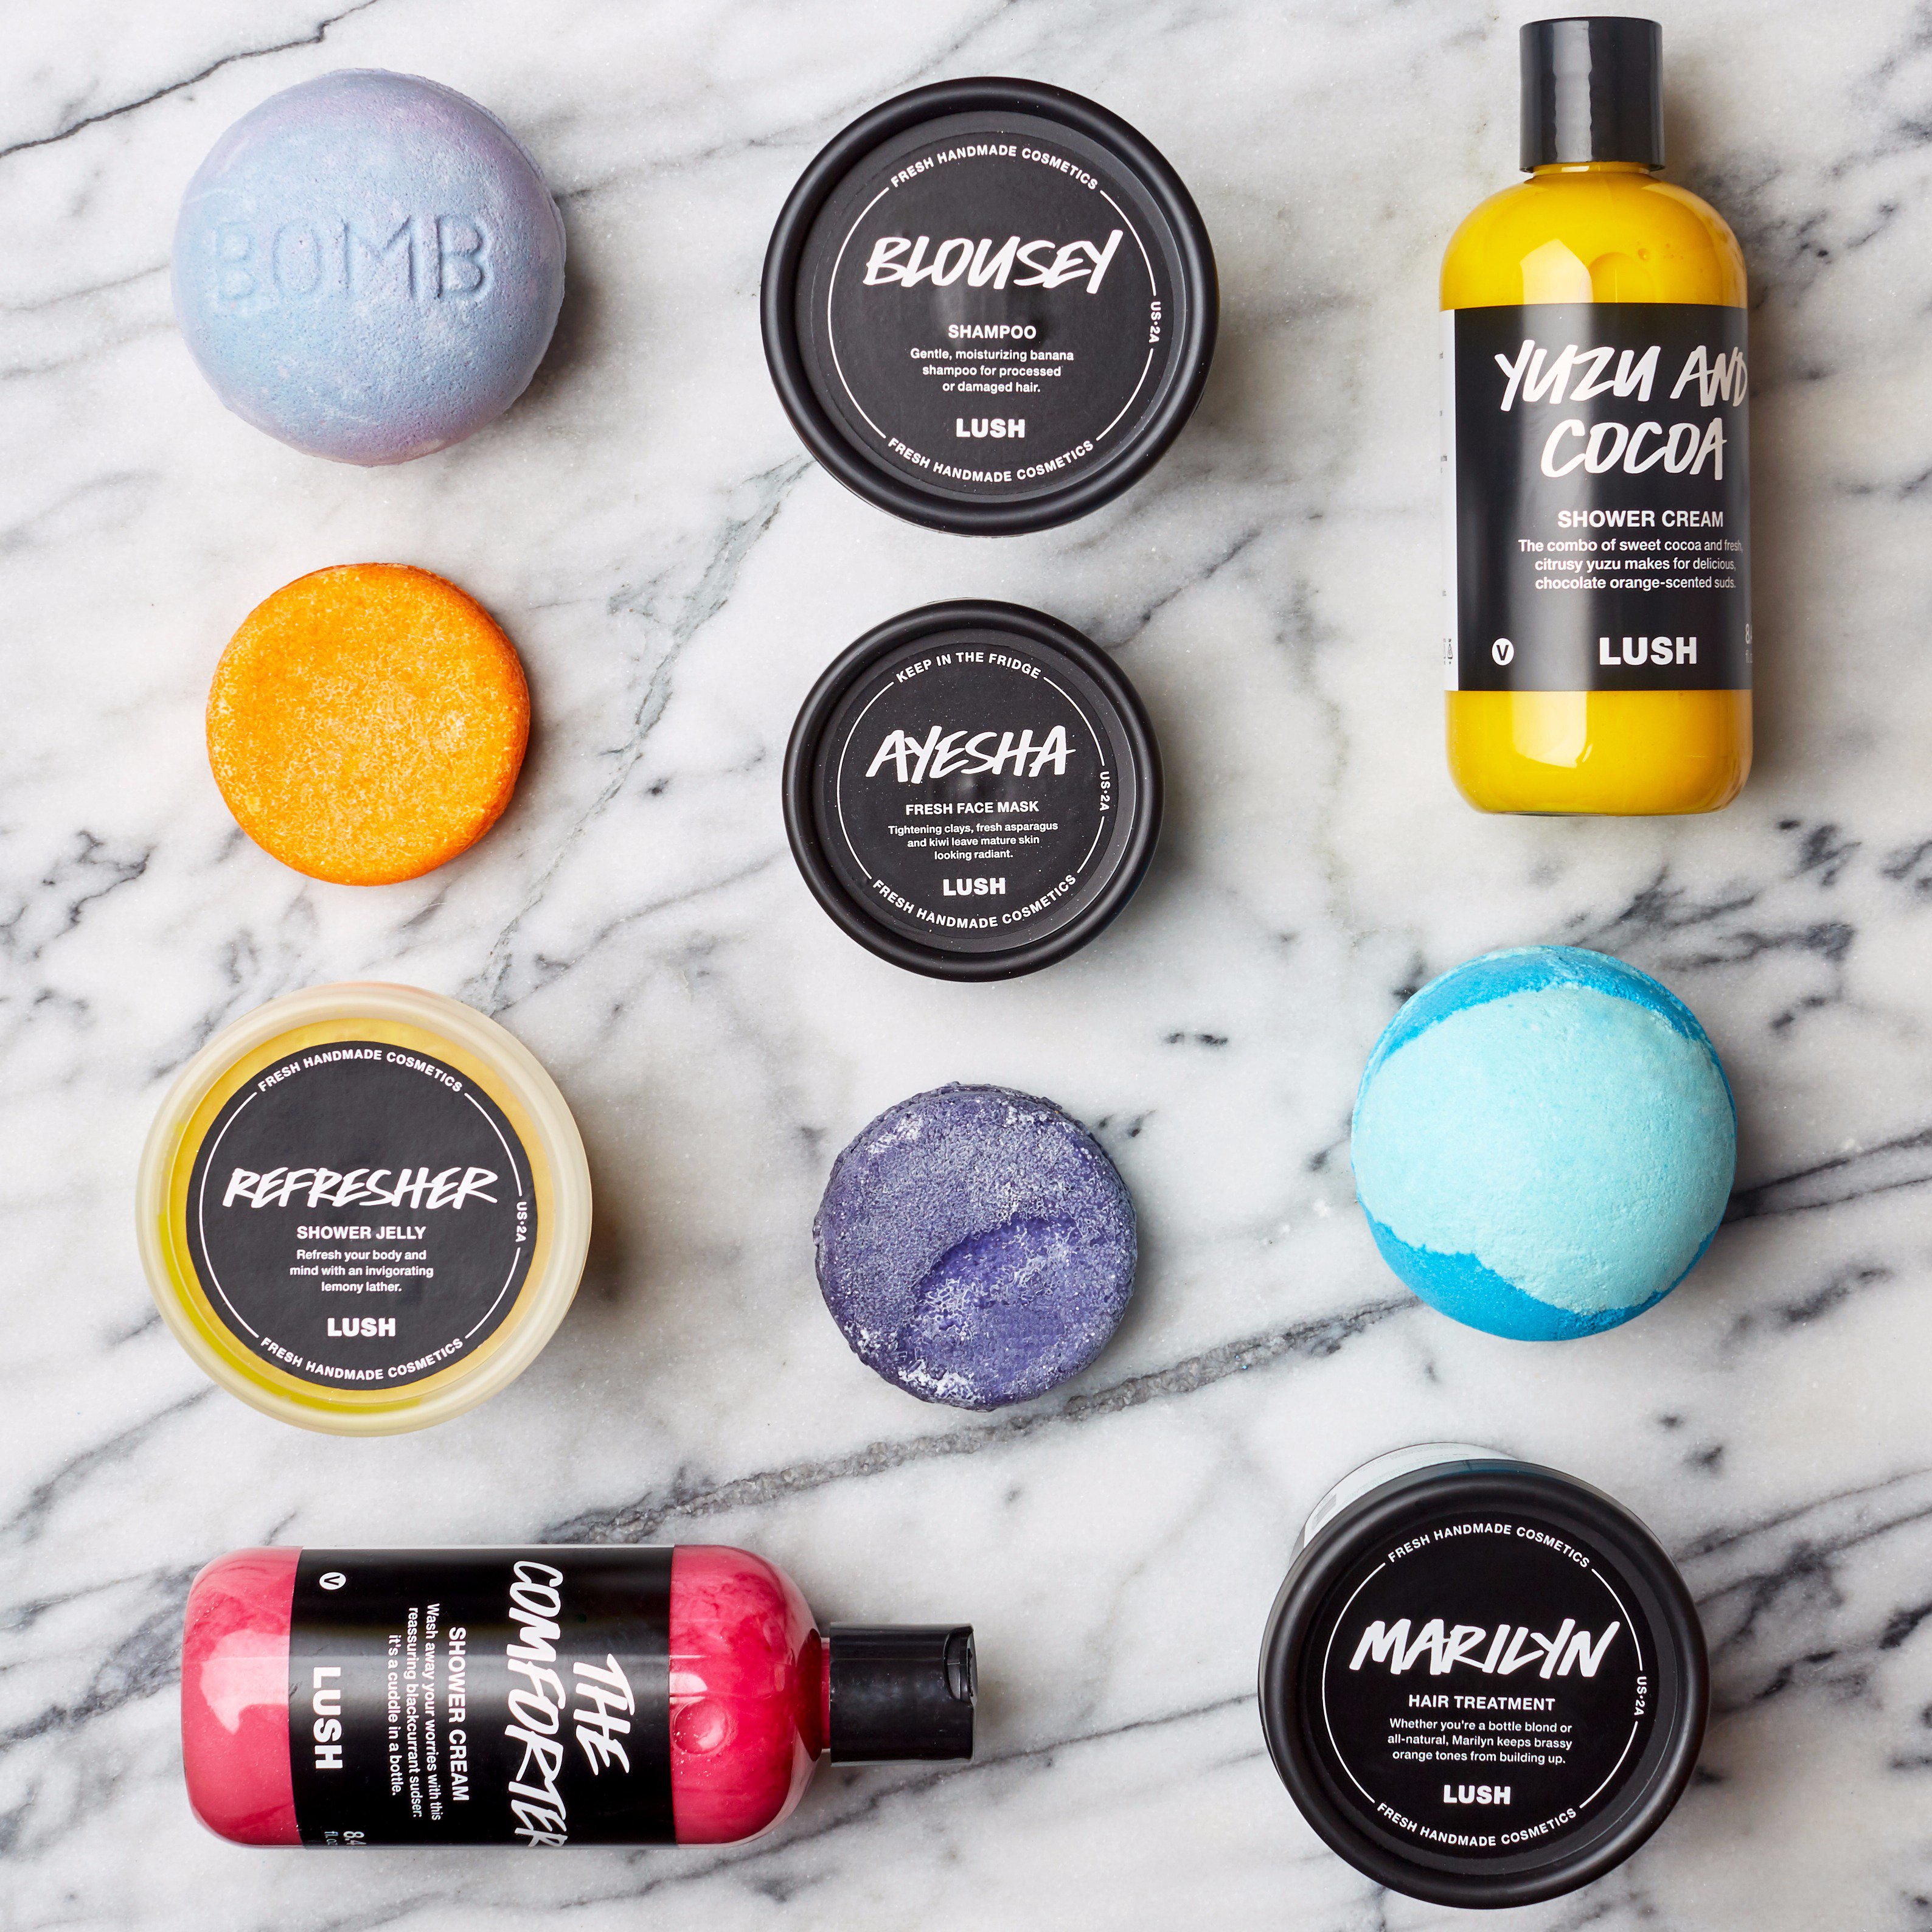 Installatie garage leven Lush North America on Twitter: "The rumors are true - to make room for new  products, we're saying goodbye to some old faves. Full list here:  https://t.co/3A7mQ0444Q https://t.co/CwNVCnMxlb" / Twitter